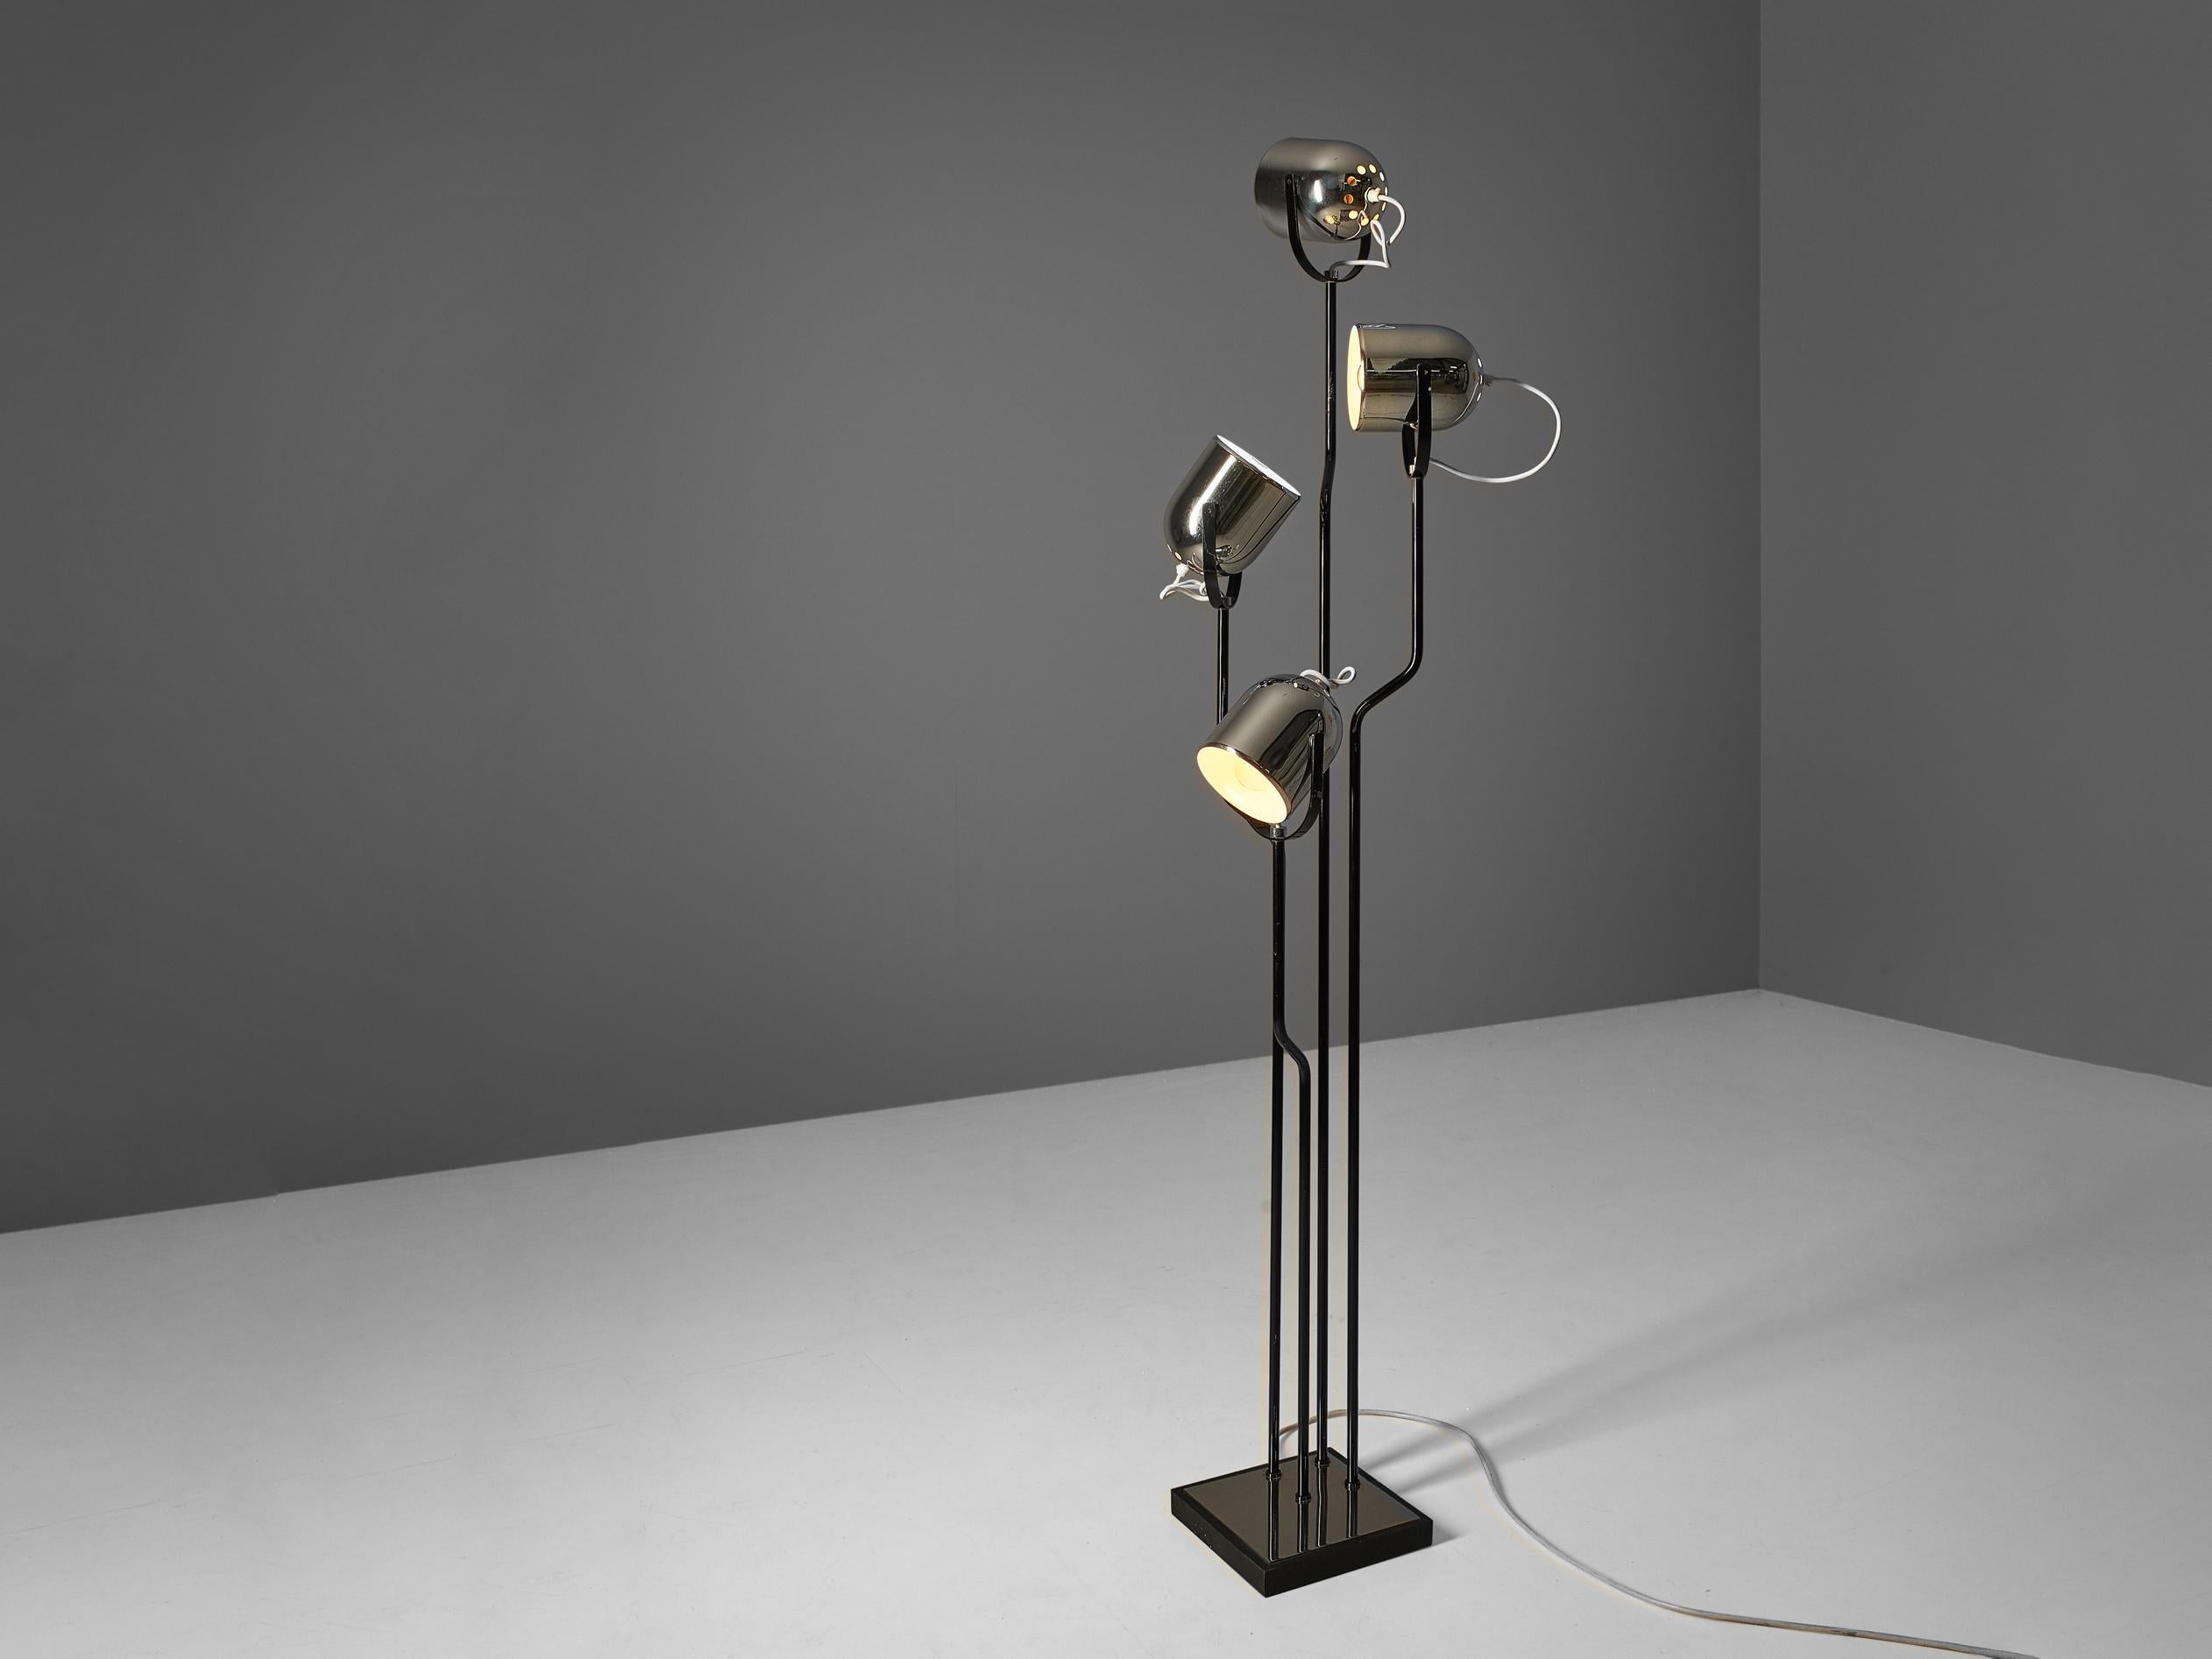 Goffredi Reggiani, floor lamp, chrome-plated steel, iron, mirror, Italy, 1970s.

This floor lamp by Italian designer Goffredi Reggiani is both functional and aesthetically pleasing to the eyes. The design features four light sources, each of them